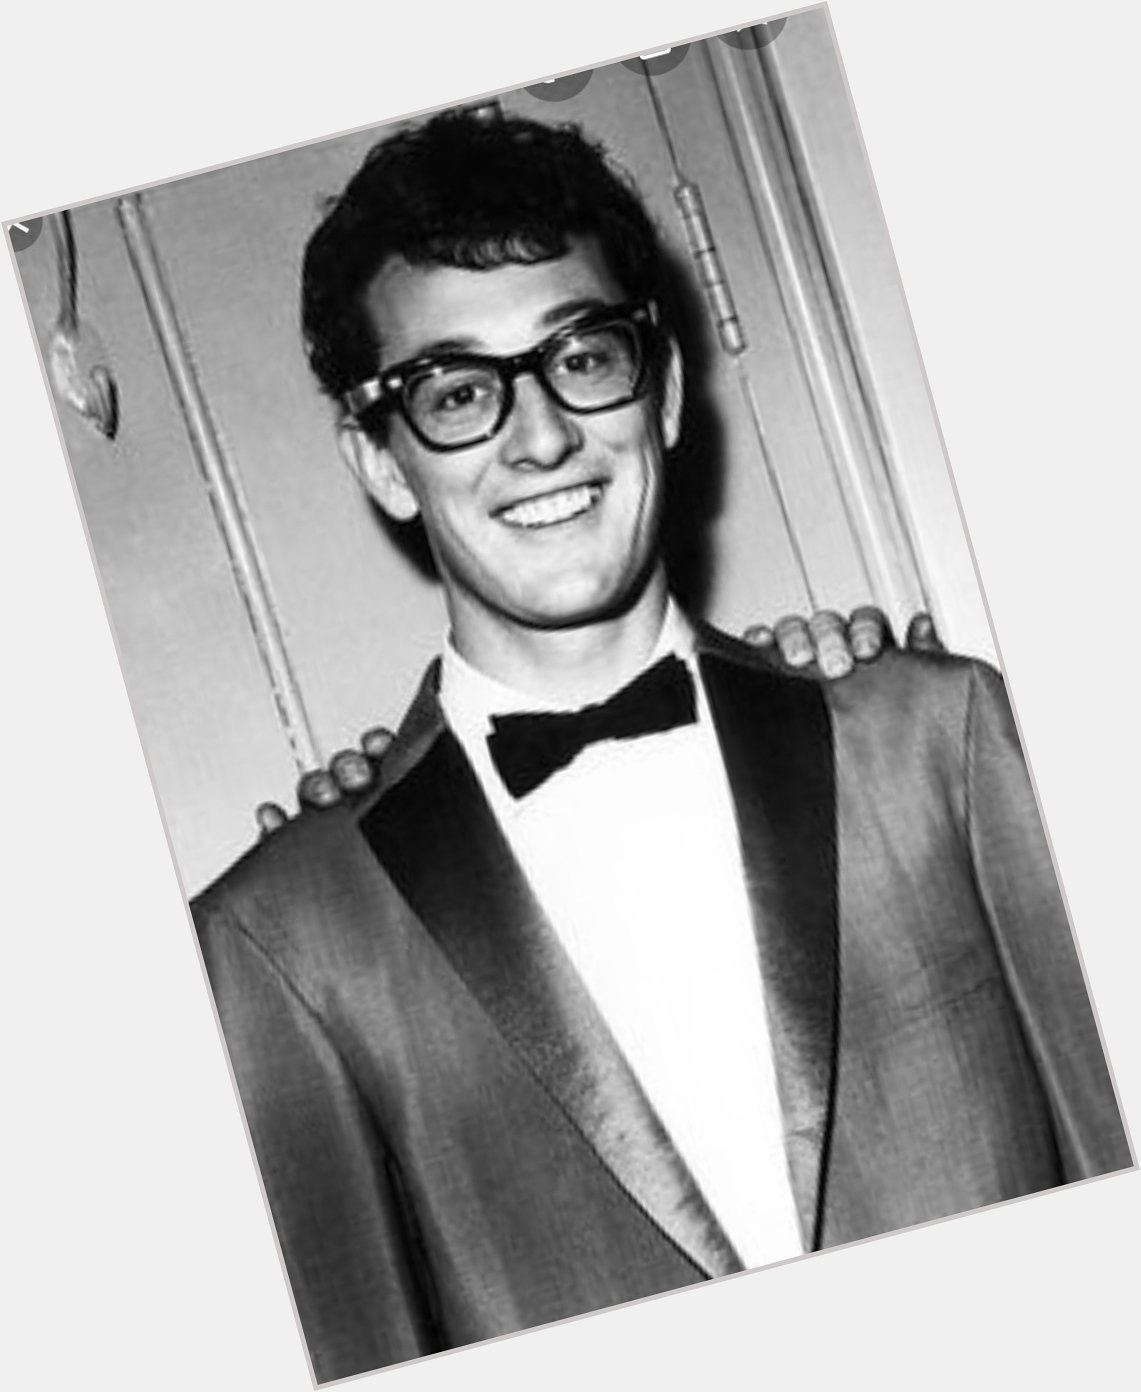 Happy birthday to Buddy Holly who would have been 84 today, taken from us too soon 